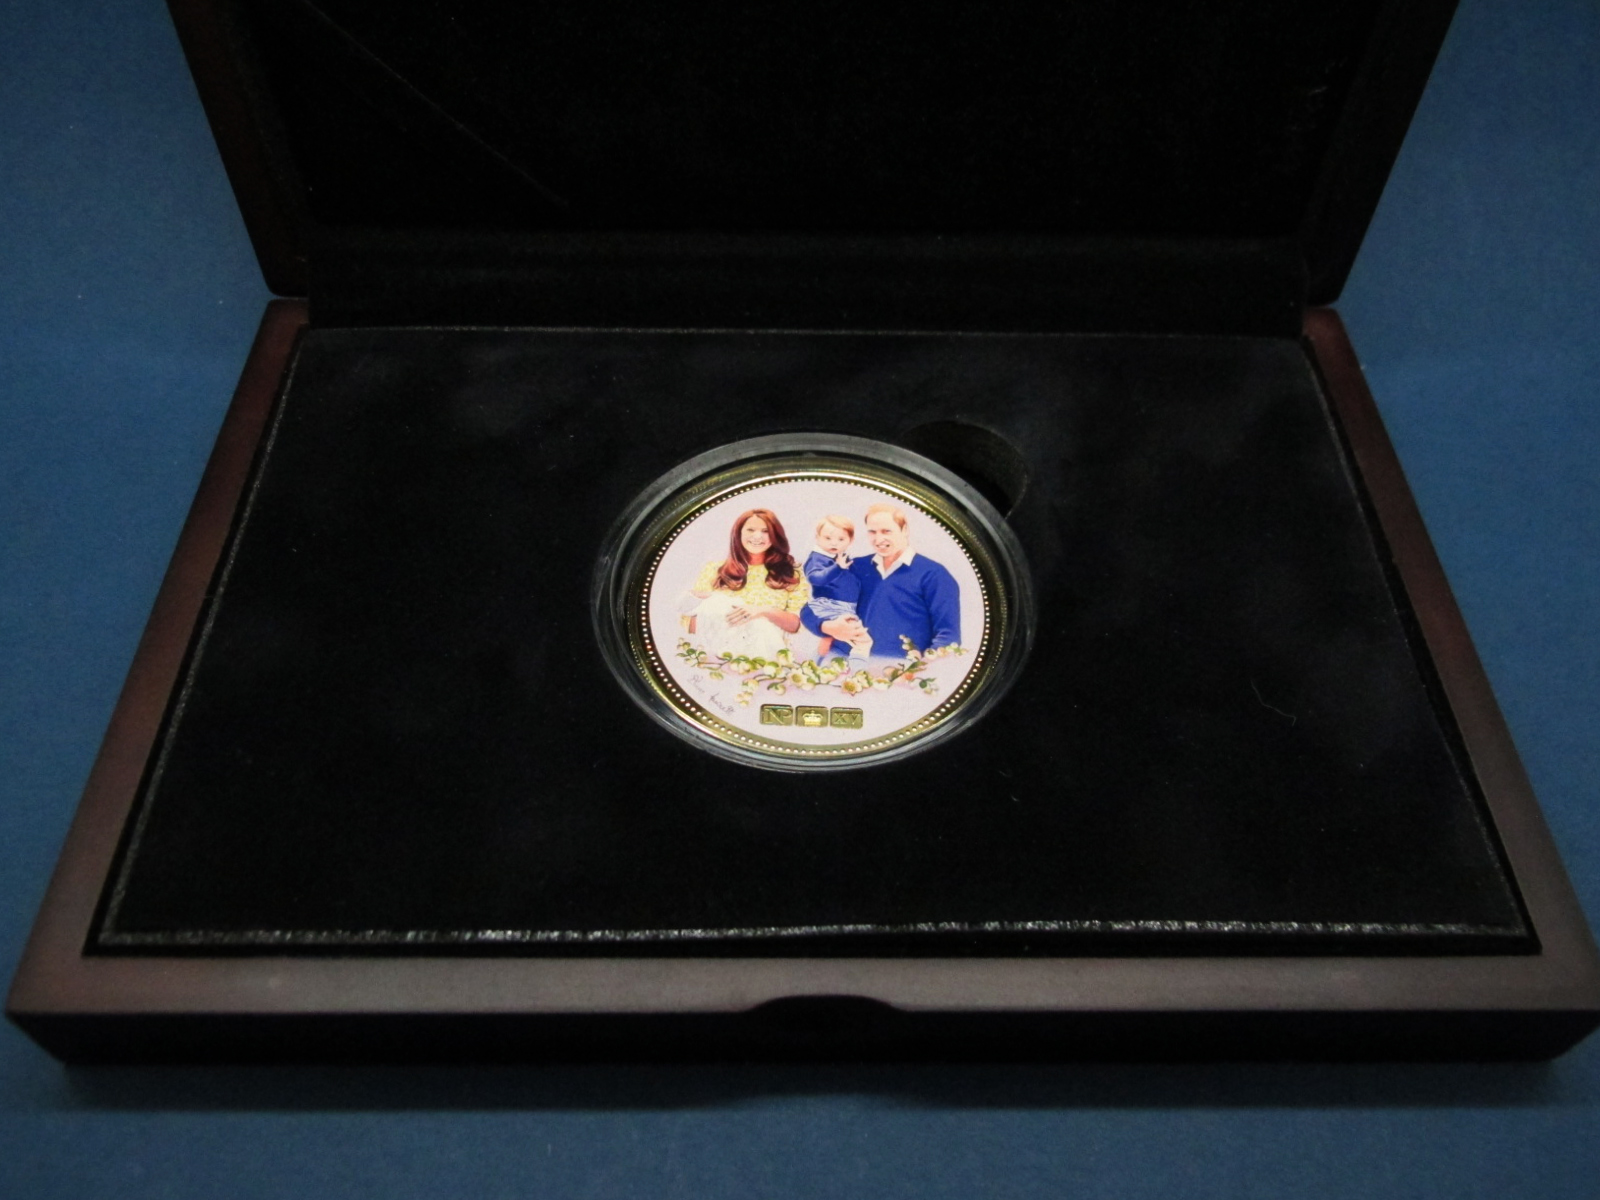 The HRH Princess Charlotte Gold Numisproof Coin, 1oz (9ct), certified No.41 of 60, cased.